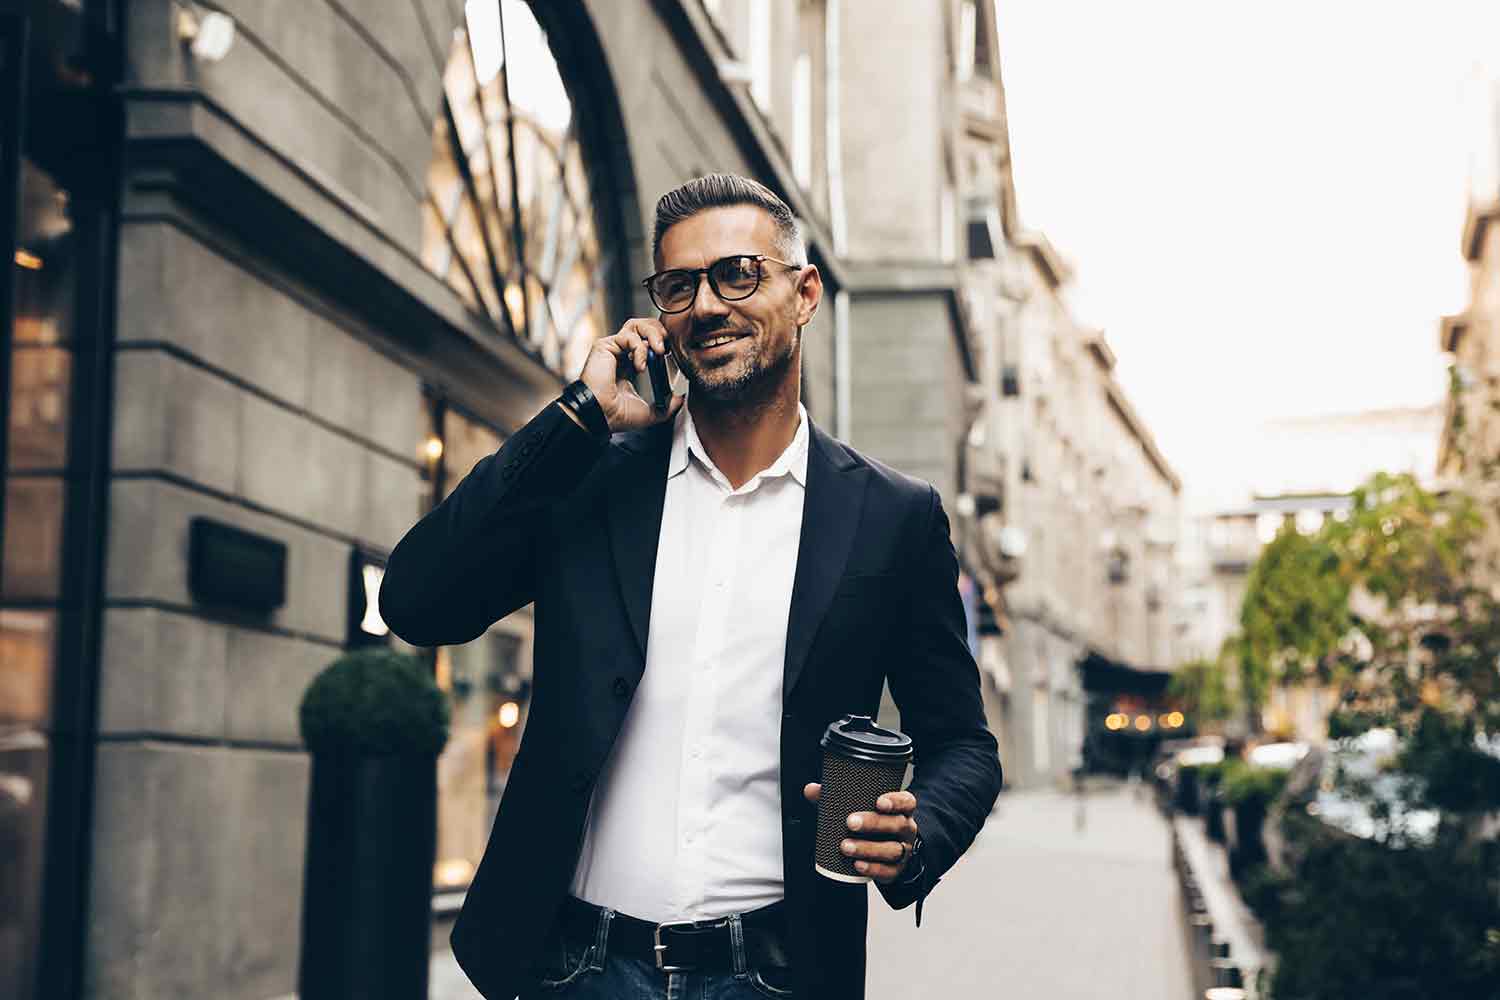 Man able to walk and talk on the phone while carrying a coffee